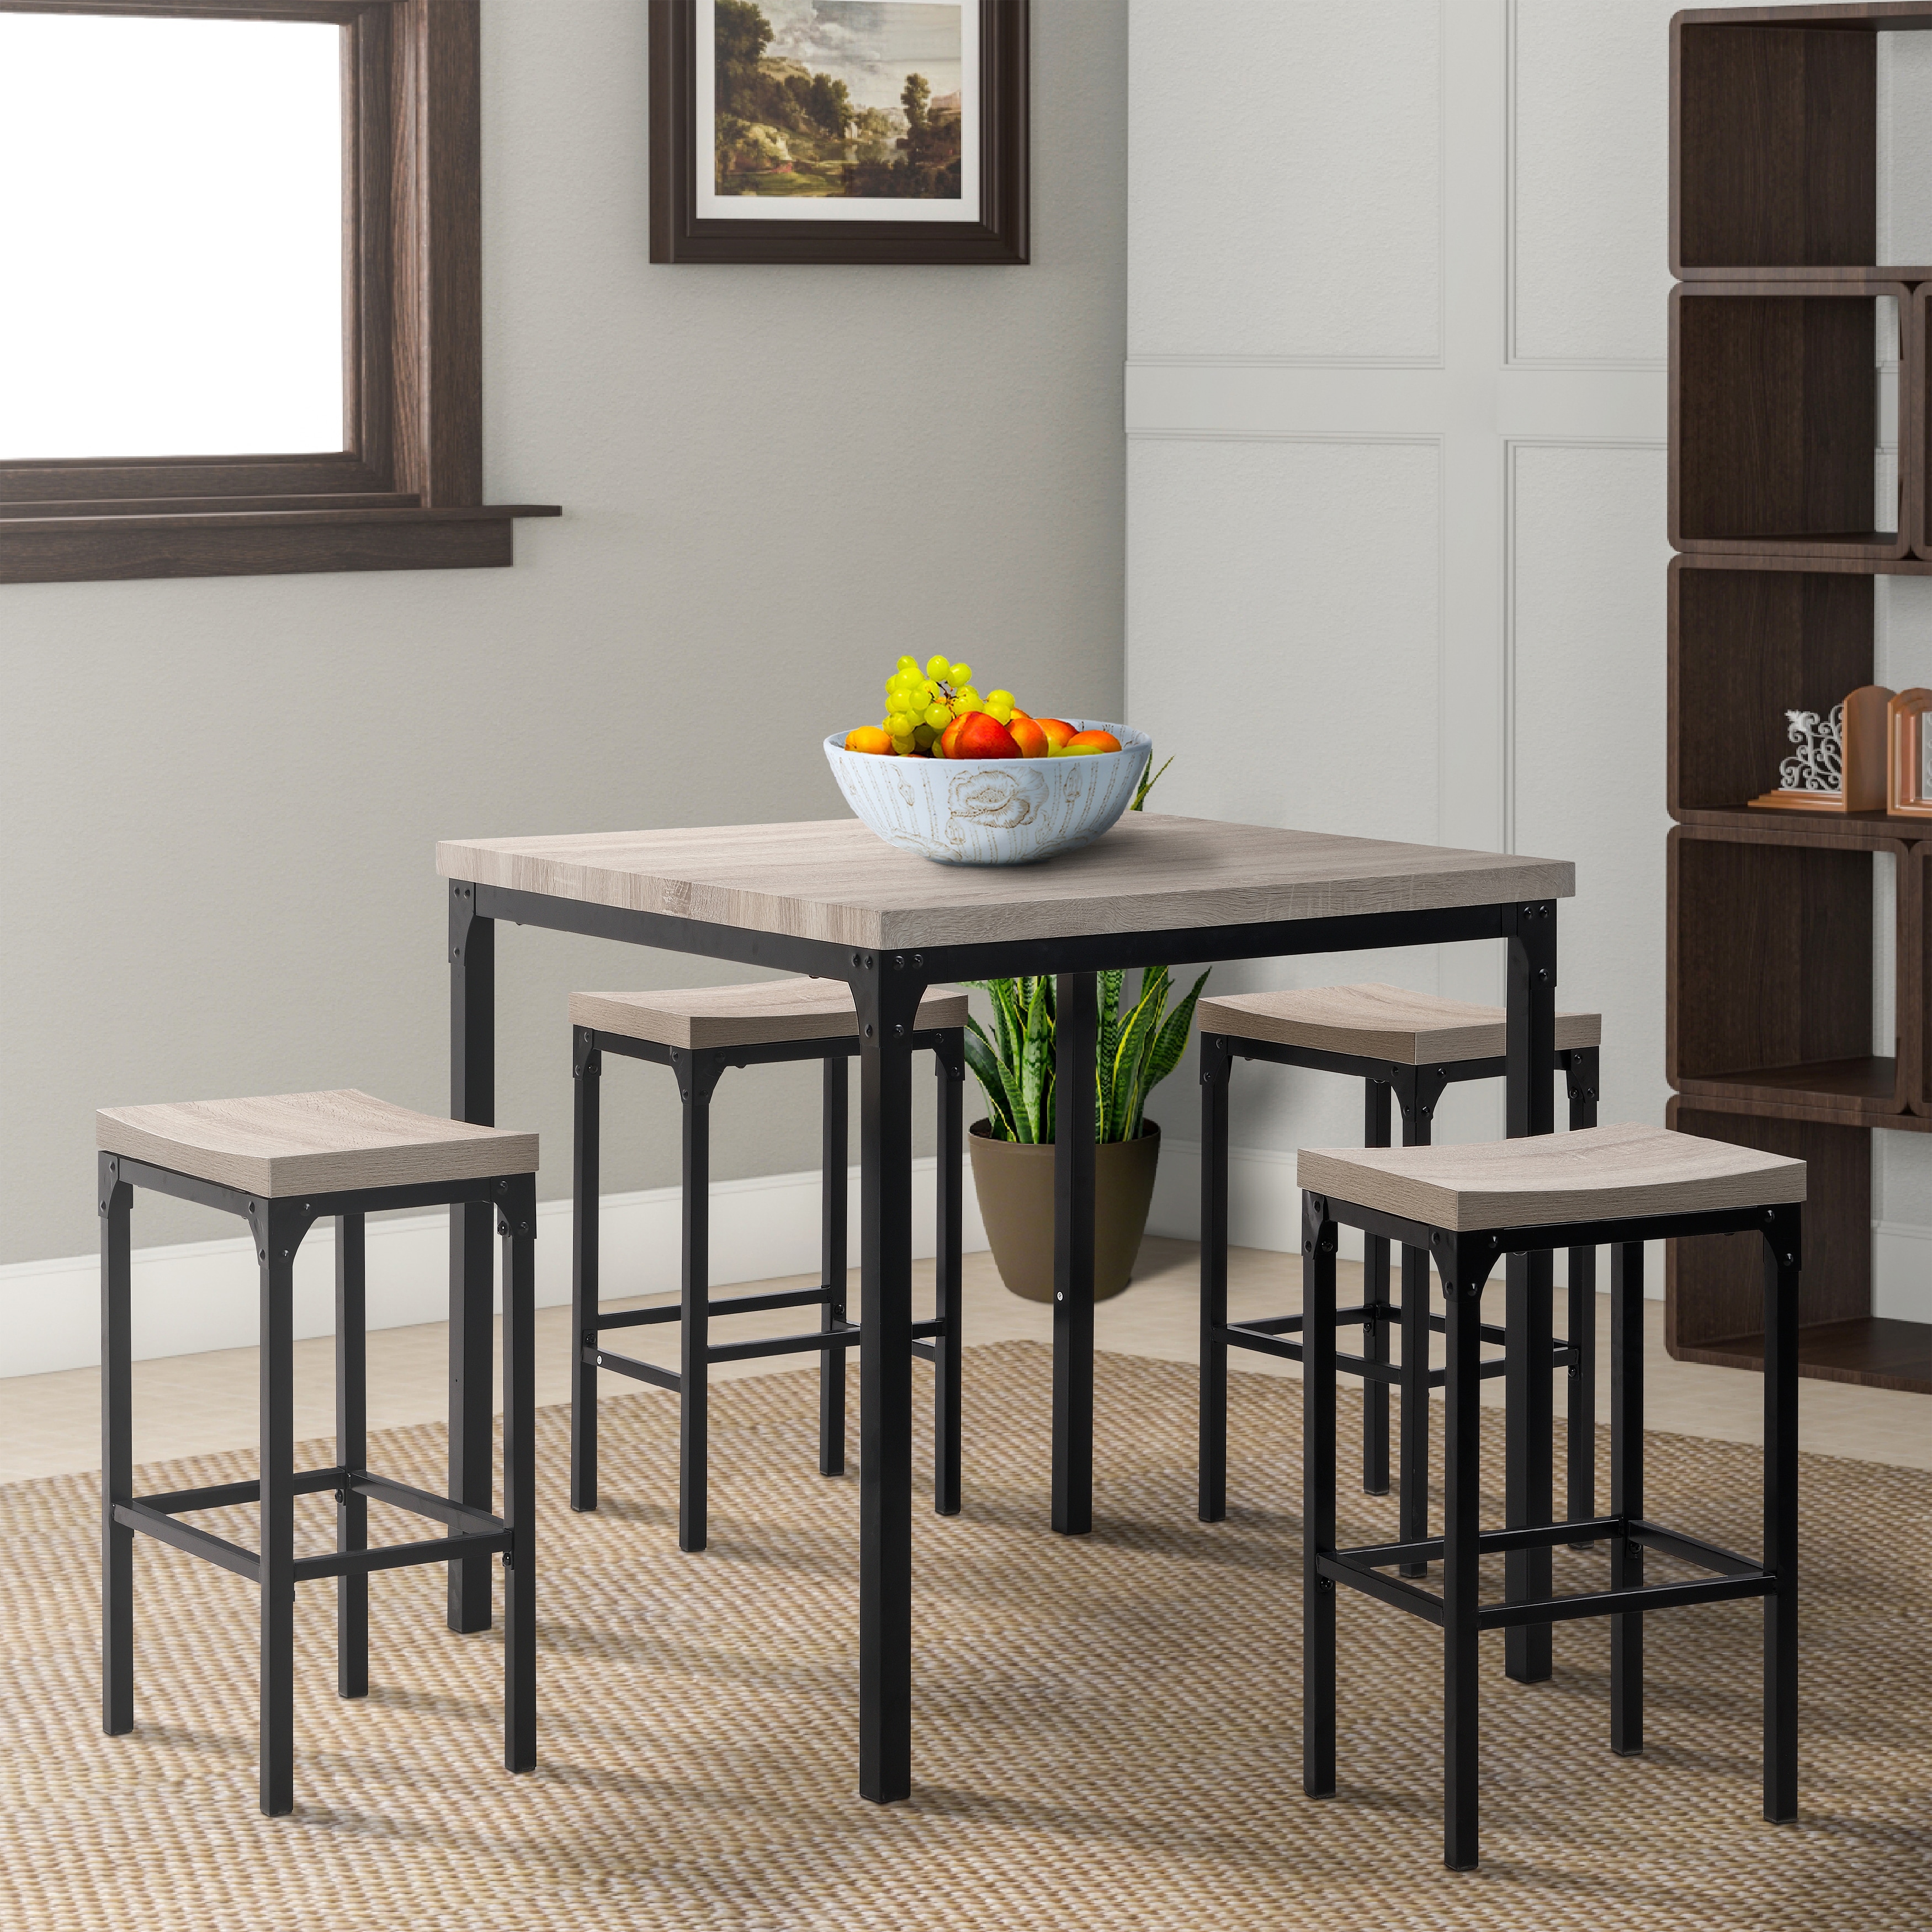 Modern 5 Pieces Metal Dining Set Square Dining Table And 4 Counter Height Stools For Dining Room